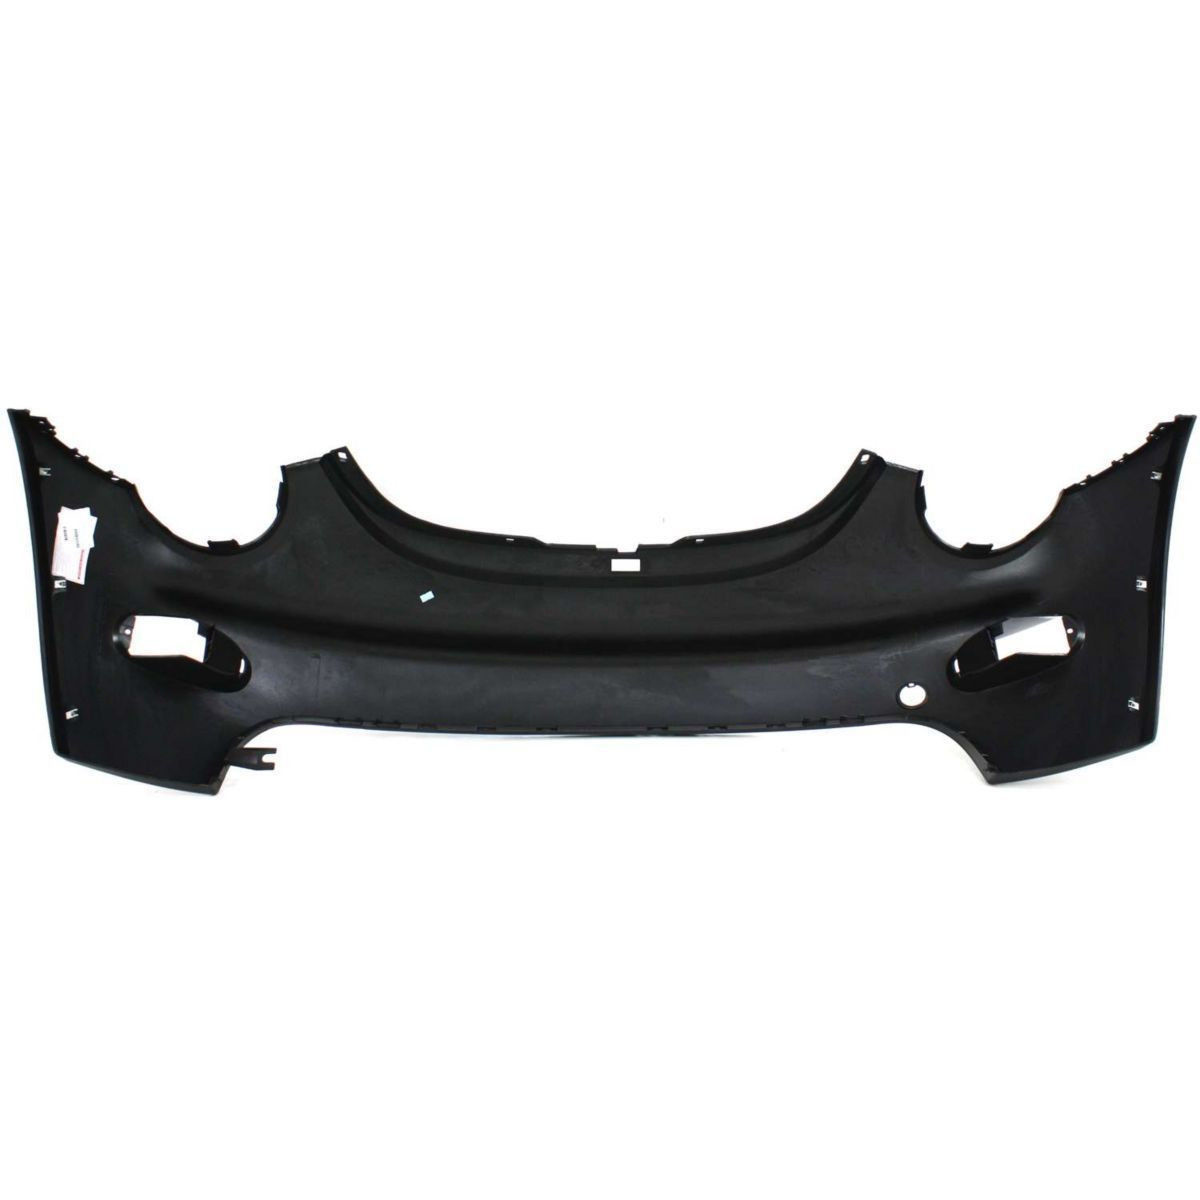 2001-2005 VOLKSWAGEN BEETLE Front Bumper Cover except Turbo S  w/o headlamp washers Painted to Match